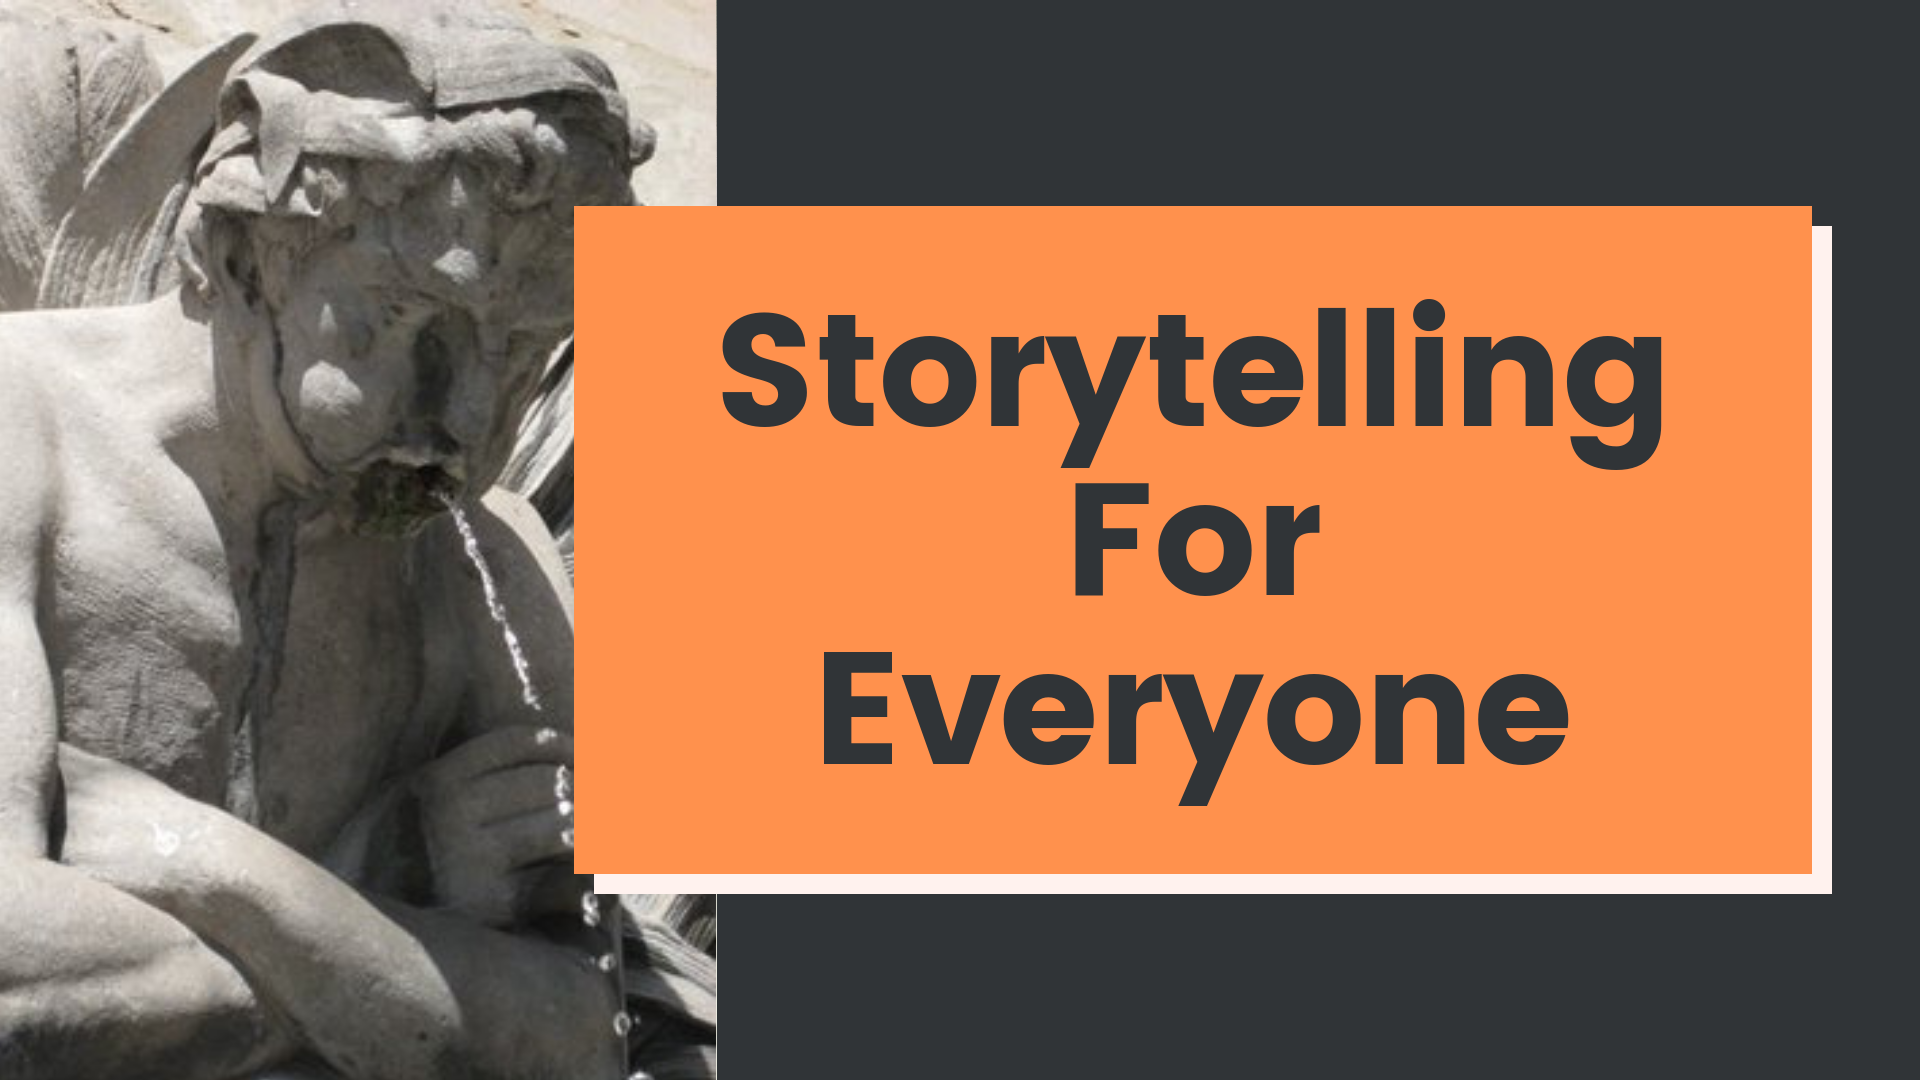 Storytelling For Everyone: A Four Week Course in Personal Narrative (ONLINE - MONDAYS IN FEBRUARY)